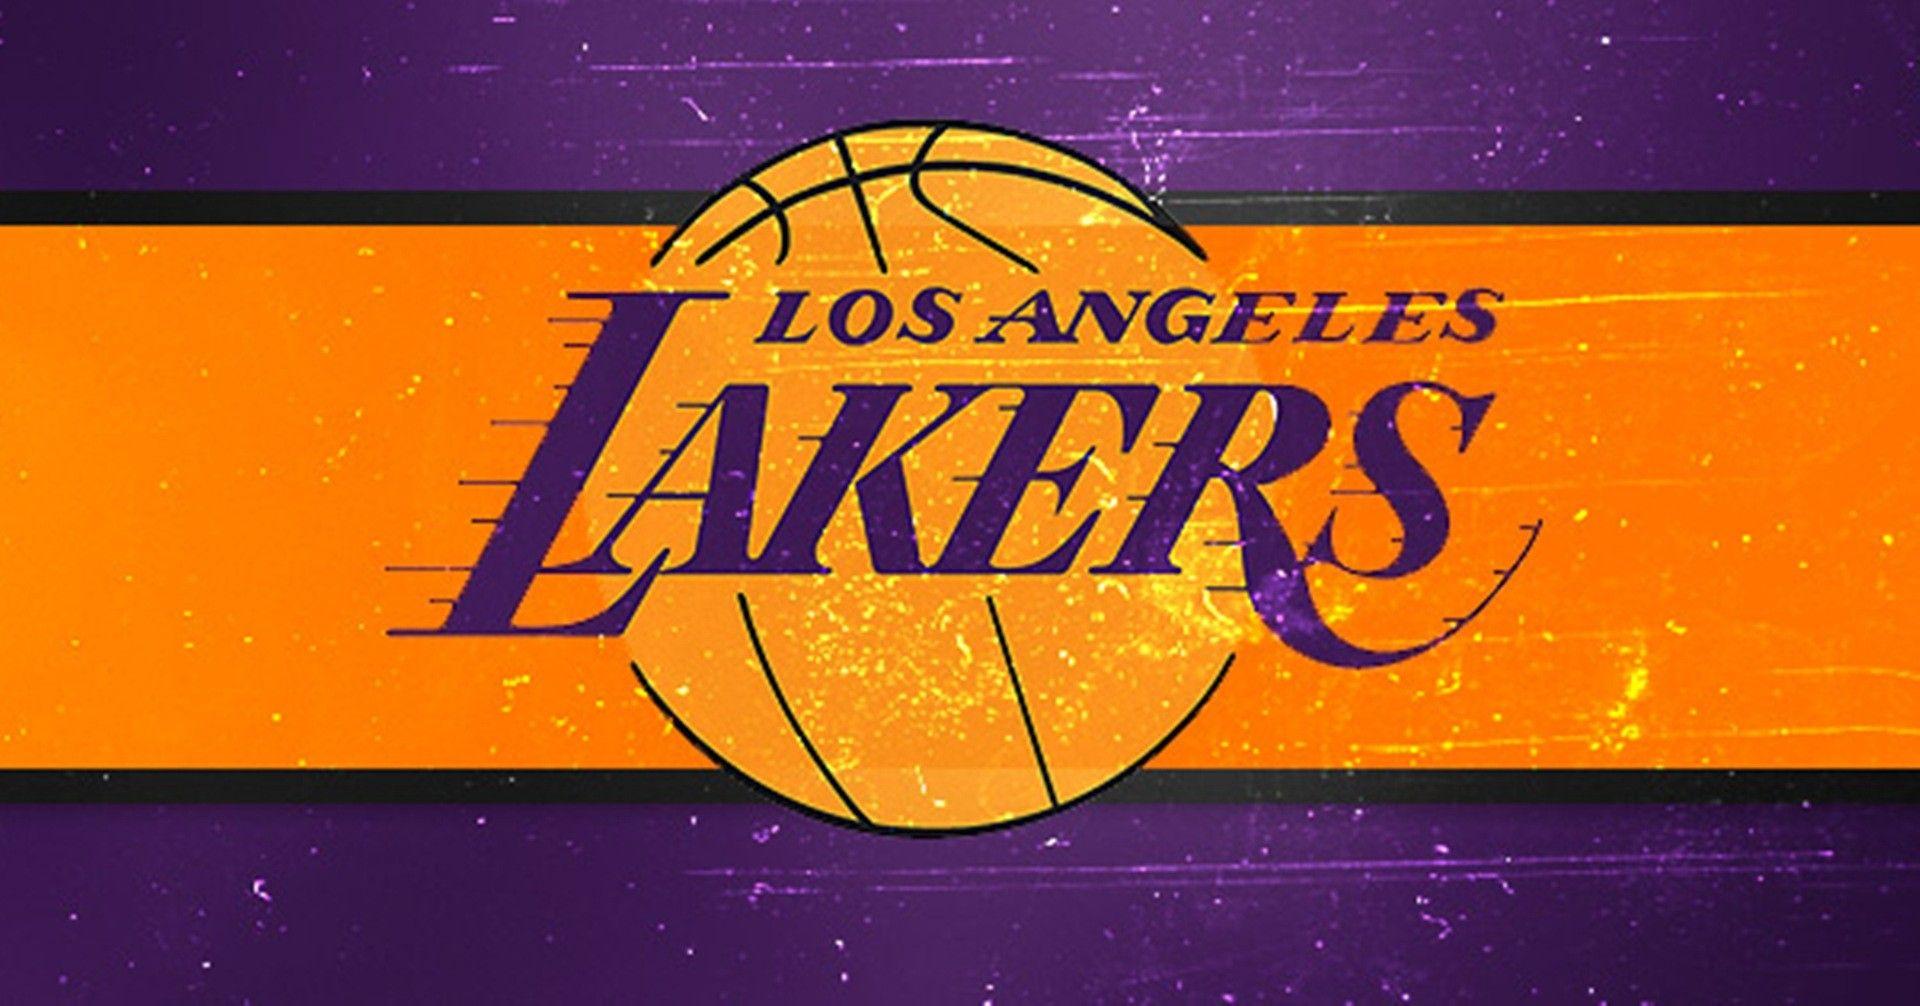 Los Angeles Lakers HD Background Wallpaper 32459